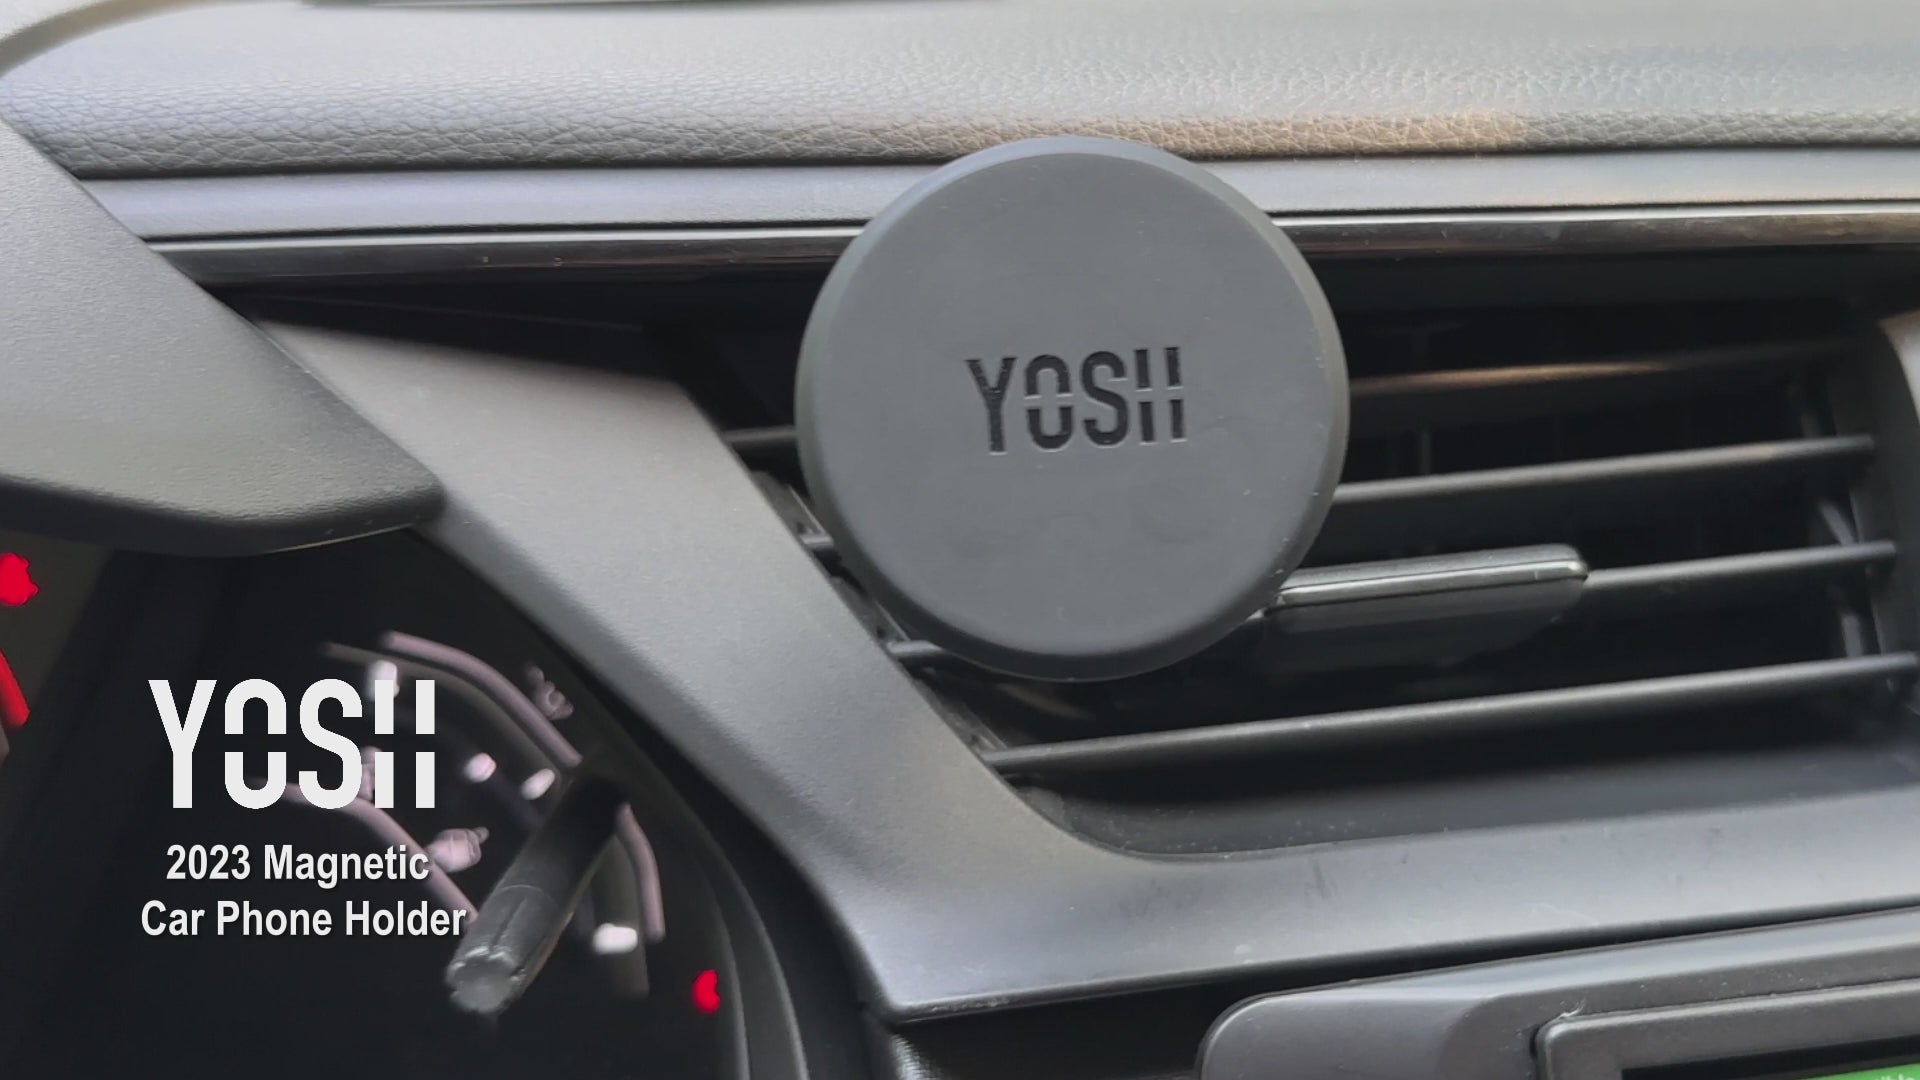 YOSH 2023 Magnetic Car Phone Holder Ventilation Improved Magnetic Mobile Phone Holder with Double Locking Clip for iPhone Samsung Huawei